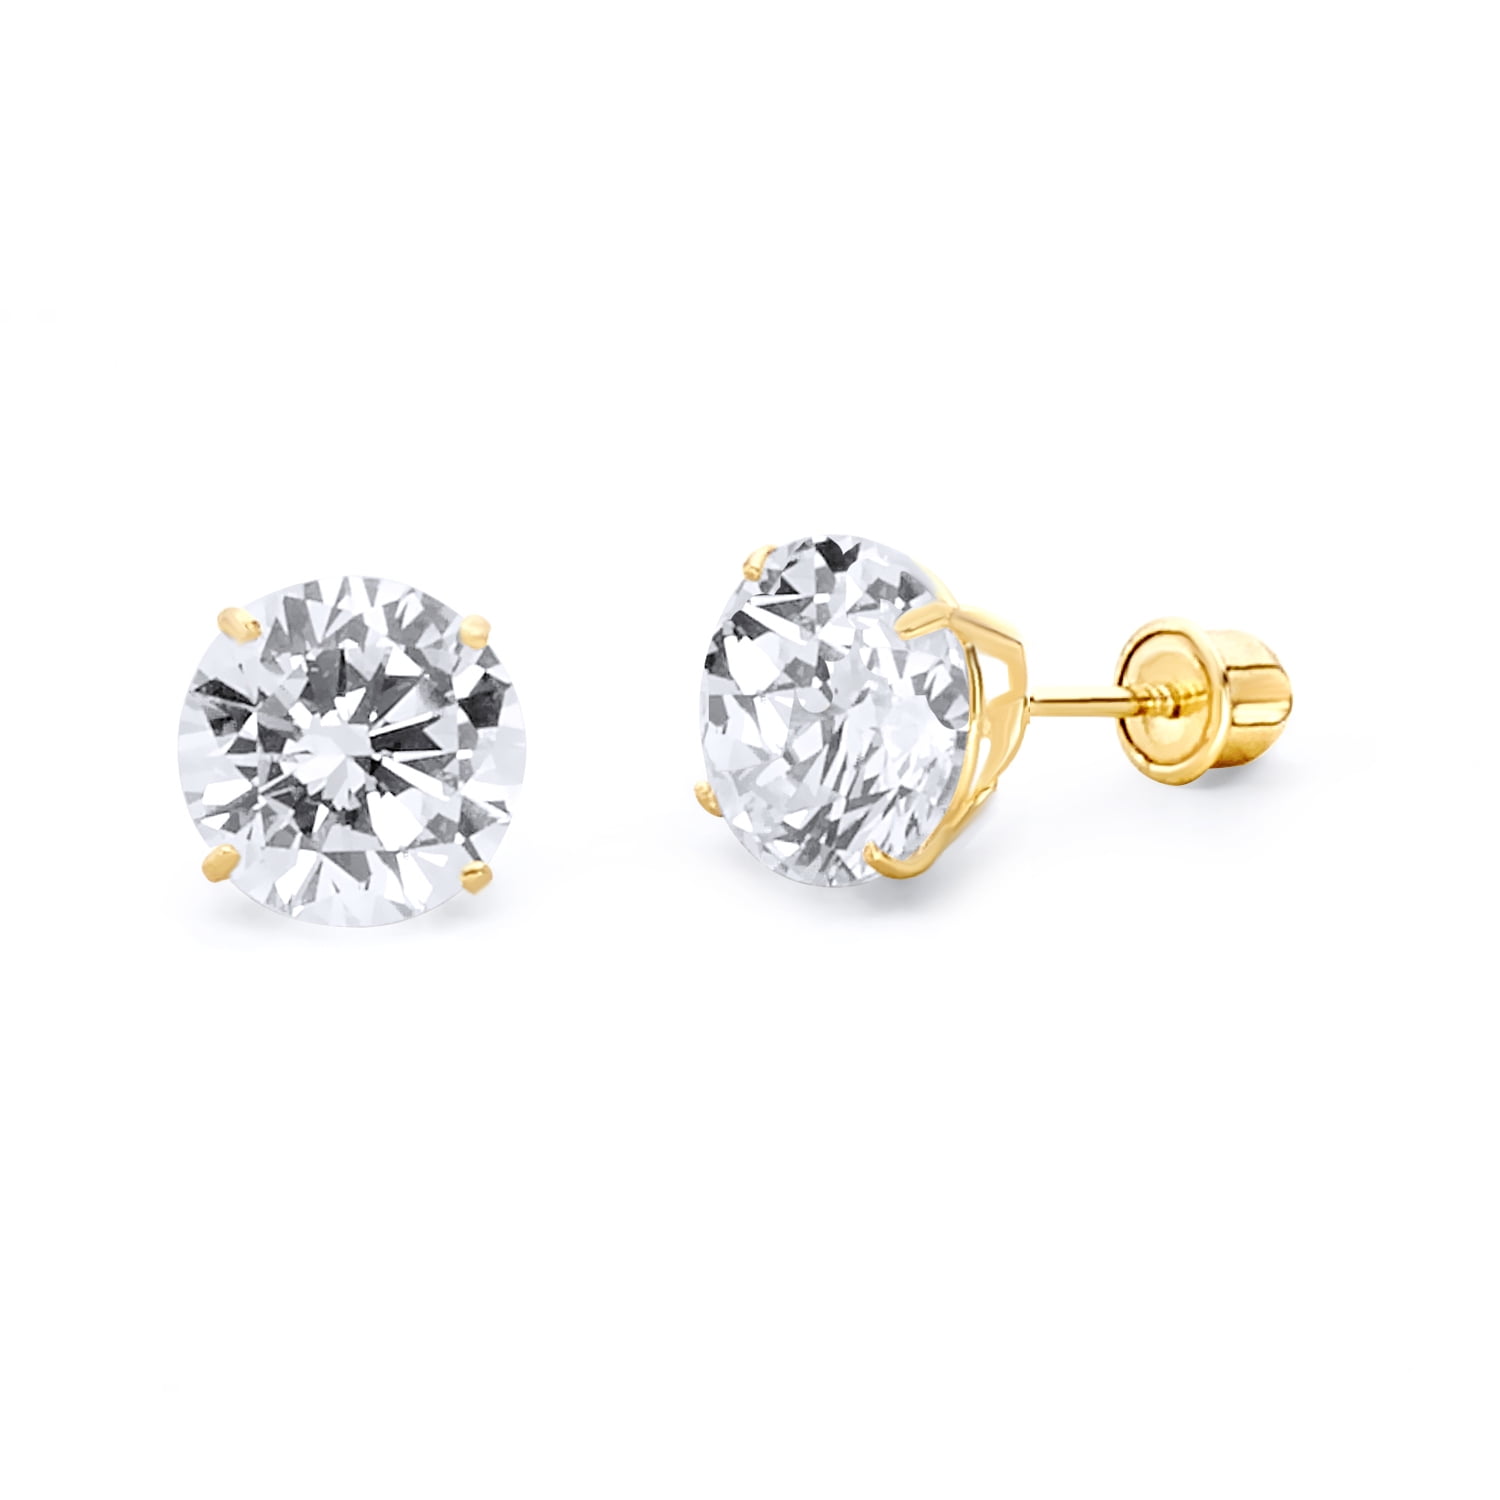 January Wellingsale 14K Yellow Gold Polished 3mm Round Birth CZ Cubic Zirconia Stone Solitaire Basket Style Prong Set Stud Earrings With Screw Back